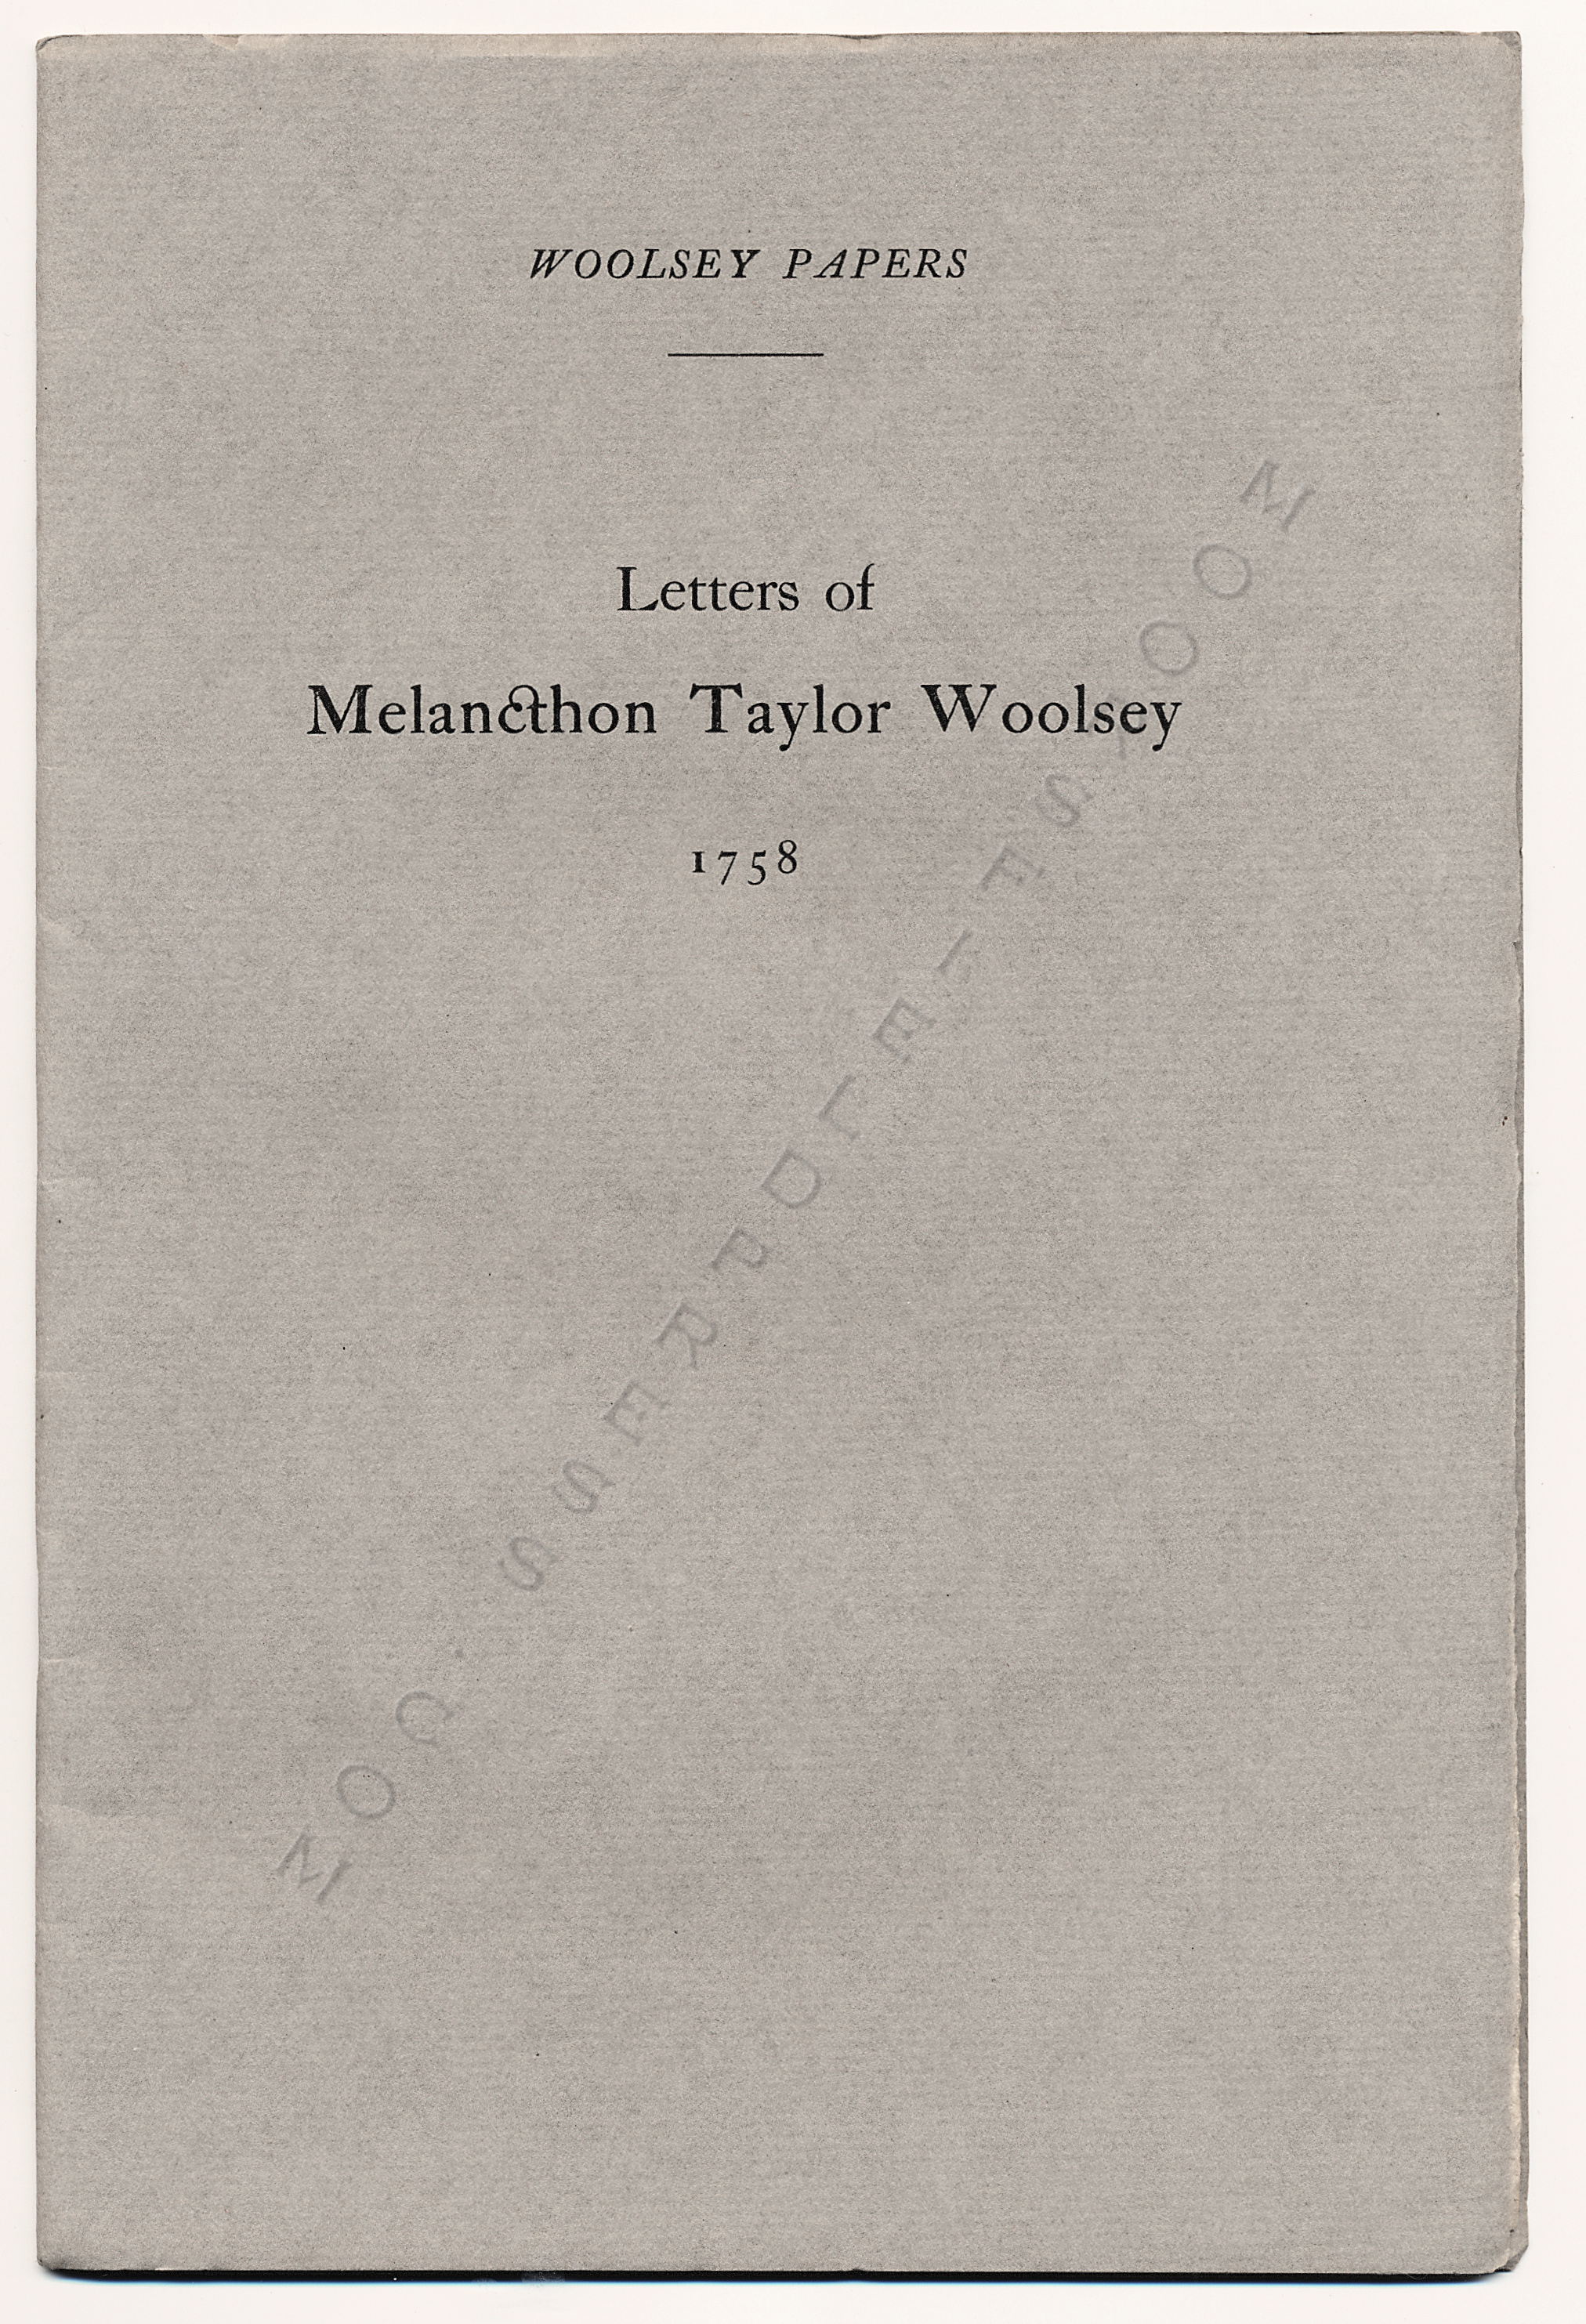 WOOLSEY
                      PAPERS-LETTERS OF MELANCTHON TAYLOR WOOLSEY 1758